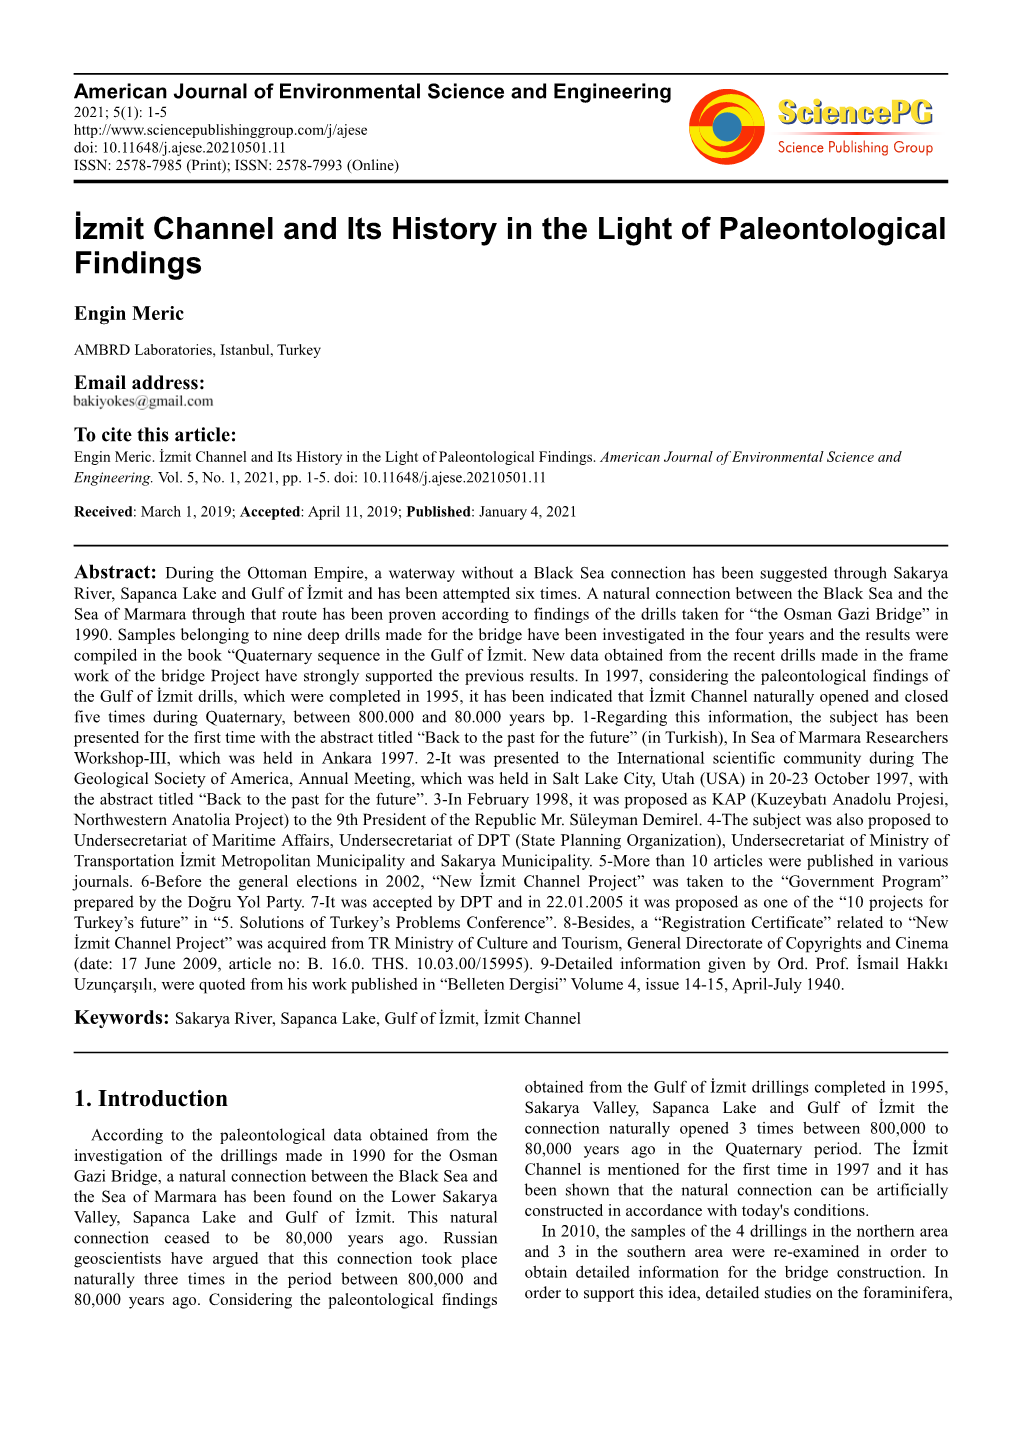 İzmit Channel and Its History in the Light of Paleontological Findings